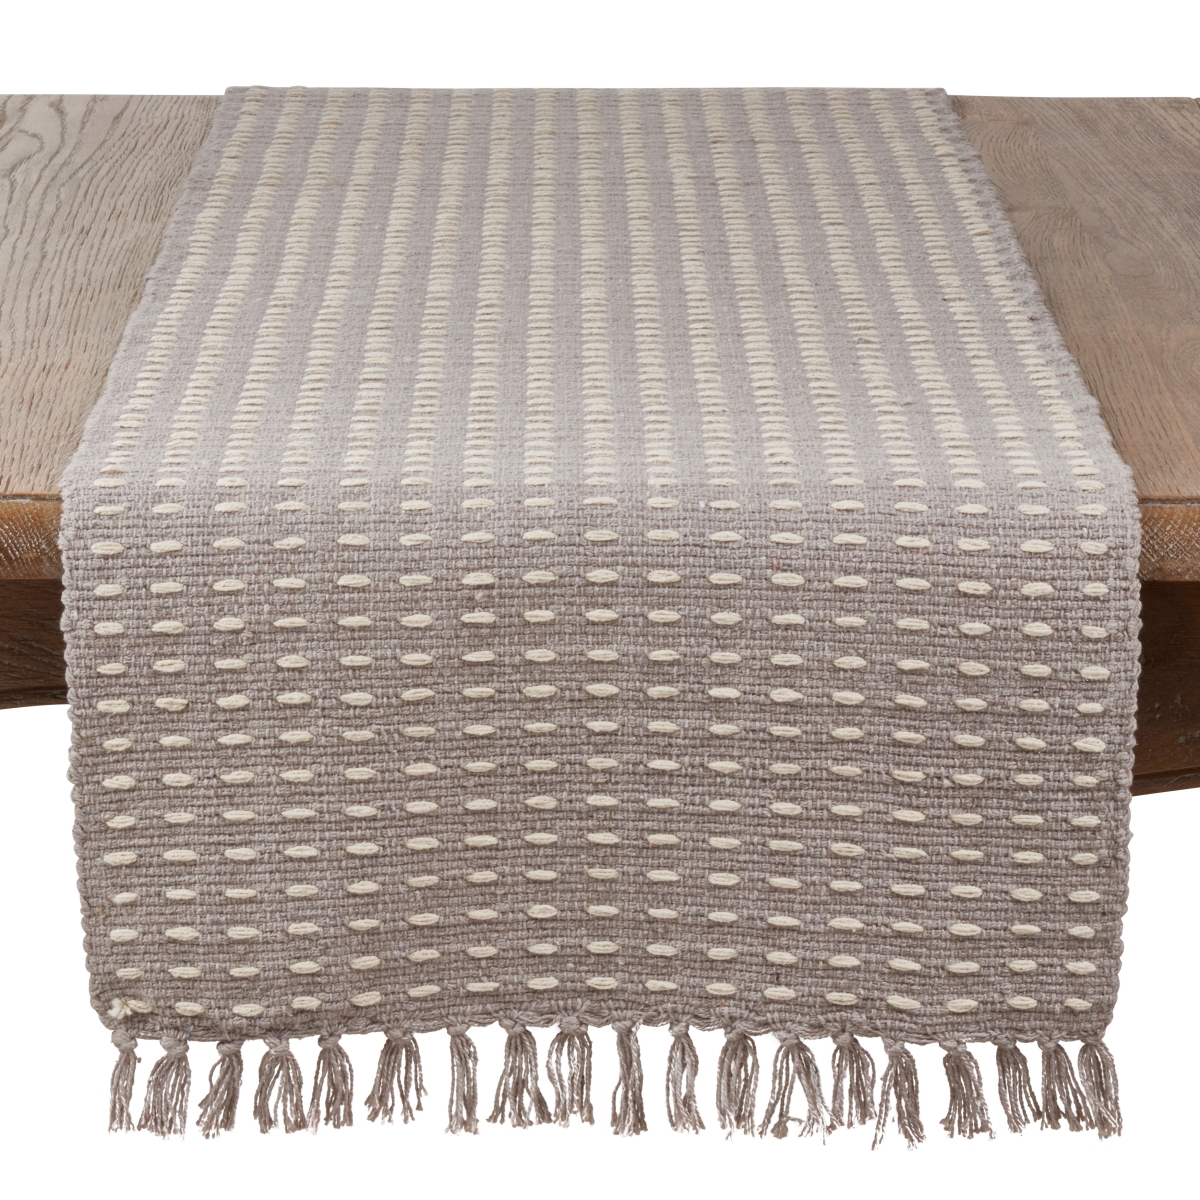 Cookhouse SARO  16 x 72 in. Rectangular Dashed Woven Long Table Runner - Grey